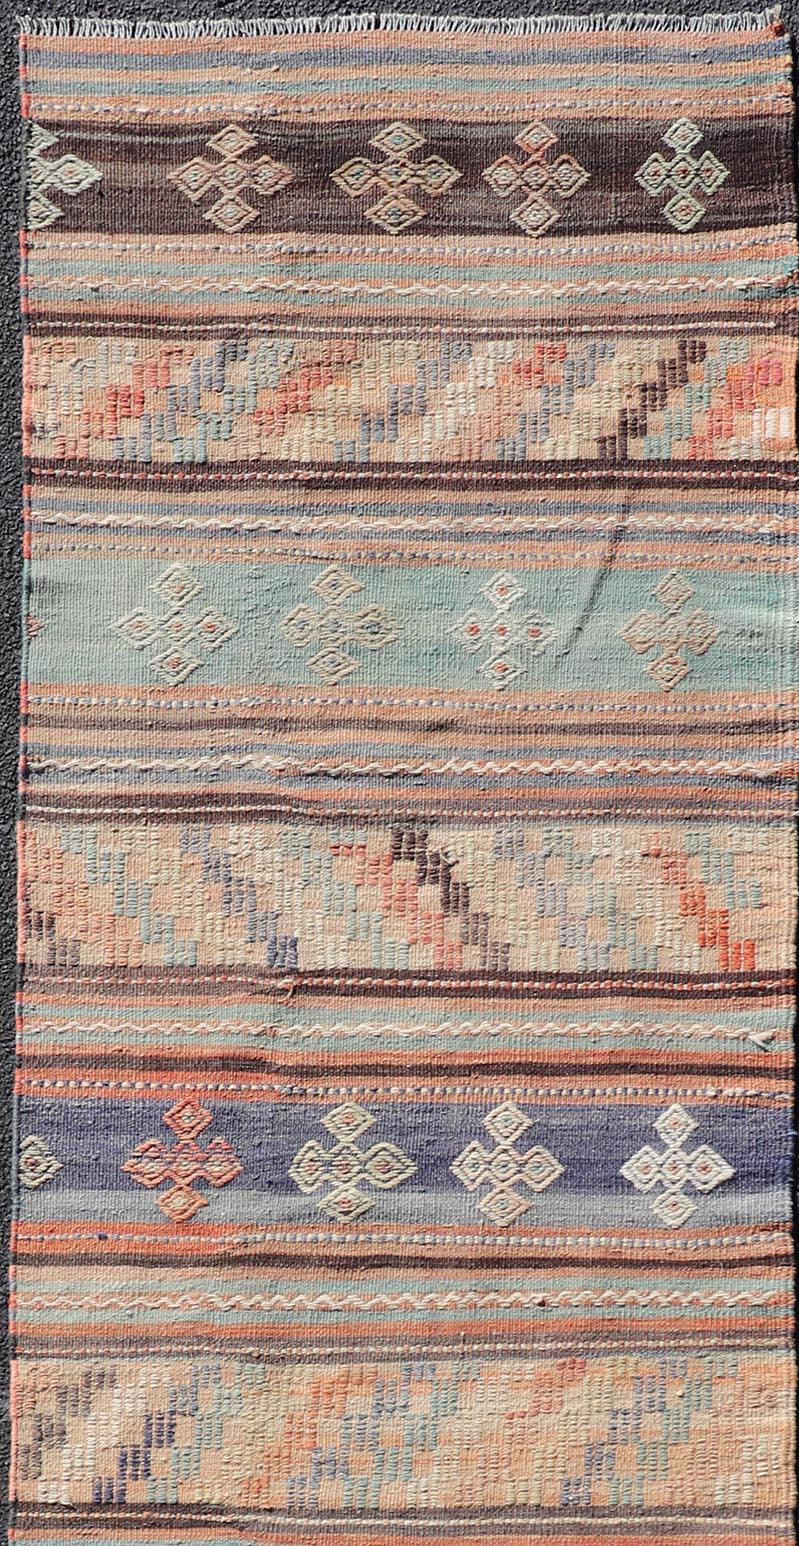 Turkish Colorful Vintage Embroidered Kilim Runner with Stripe's and Geometric Motifs For Sale